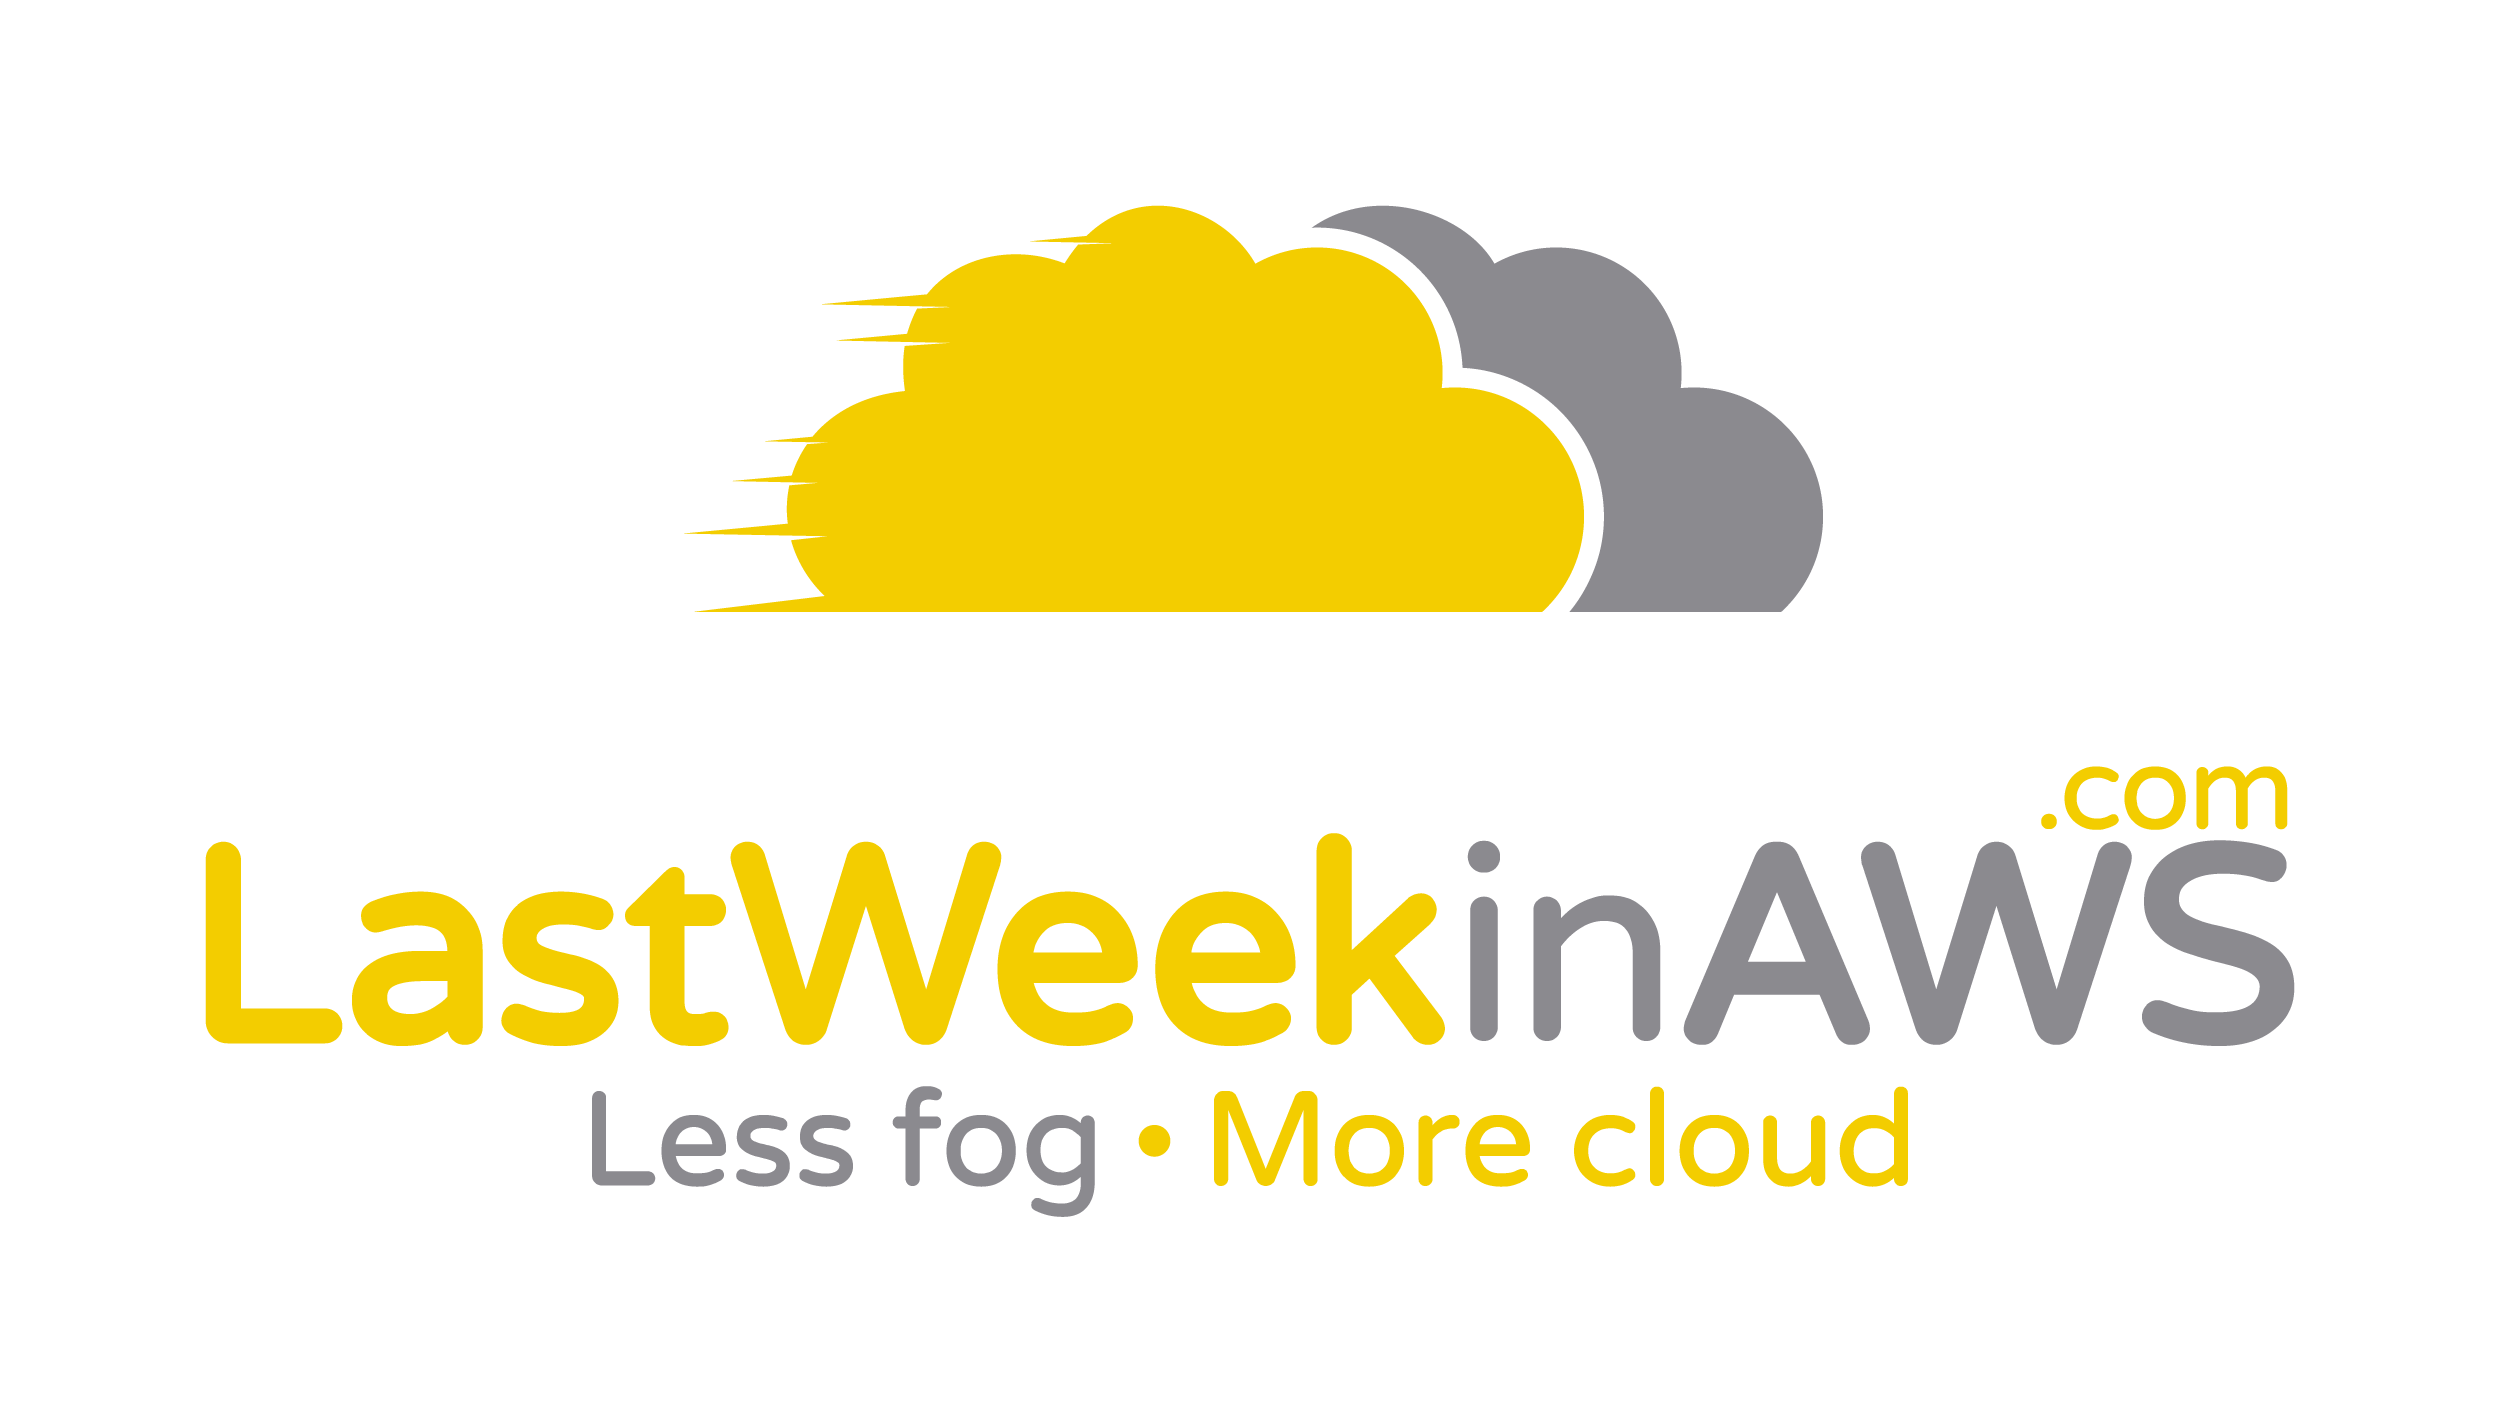 I read Last Week in AWS religiously and you should too